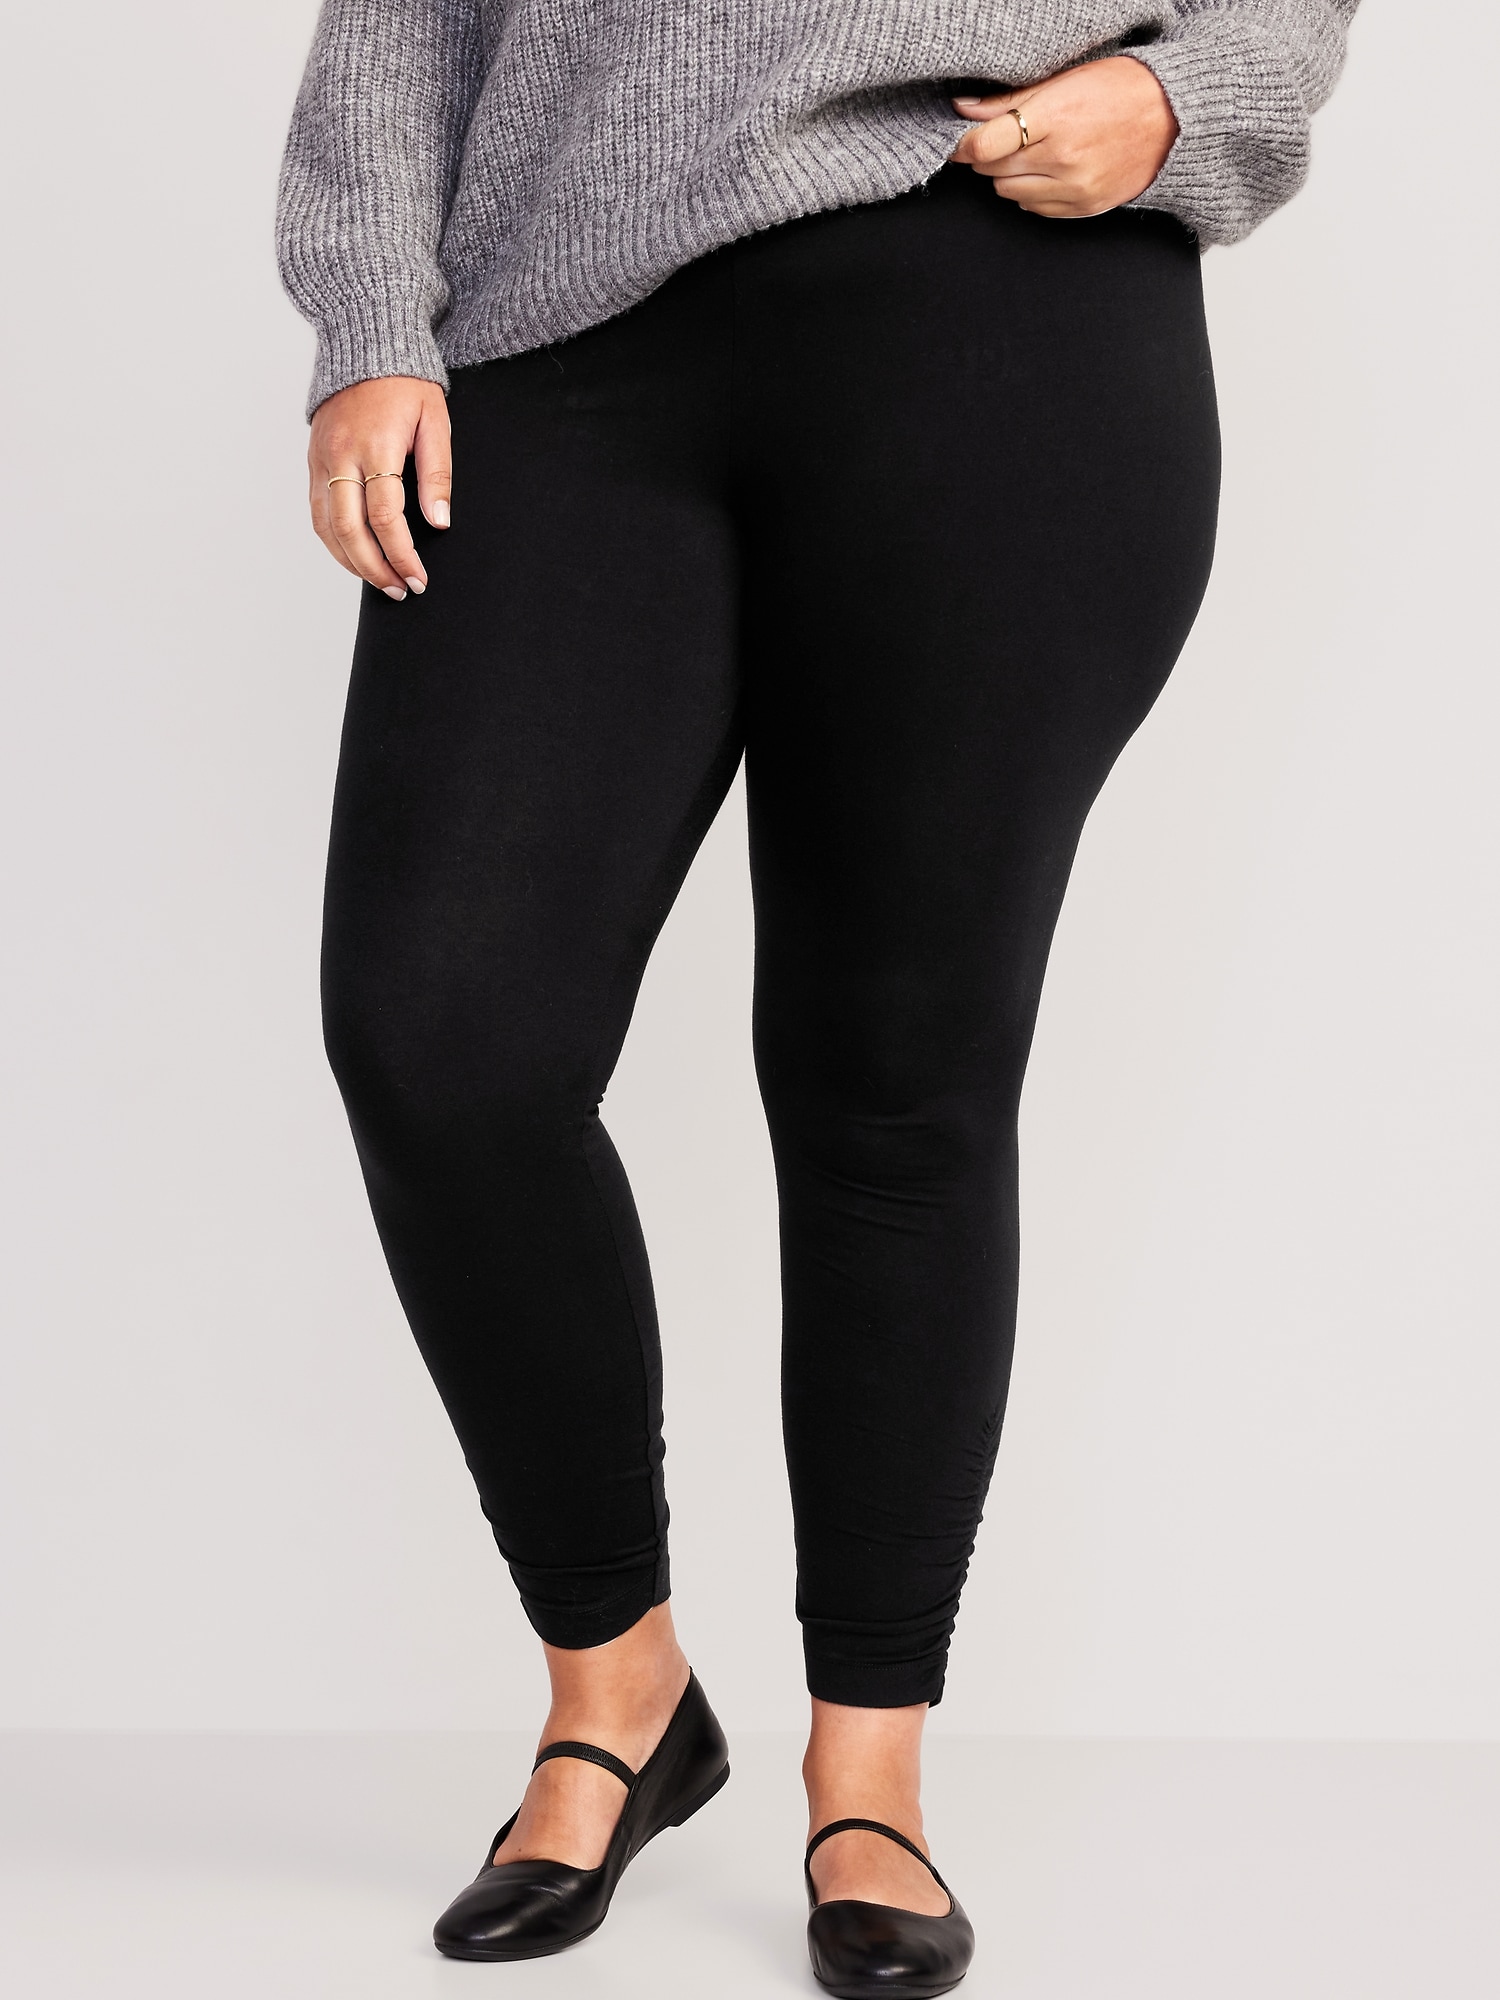 High-Waisted Ruched 7/8 Legging for Women | Old Navy